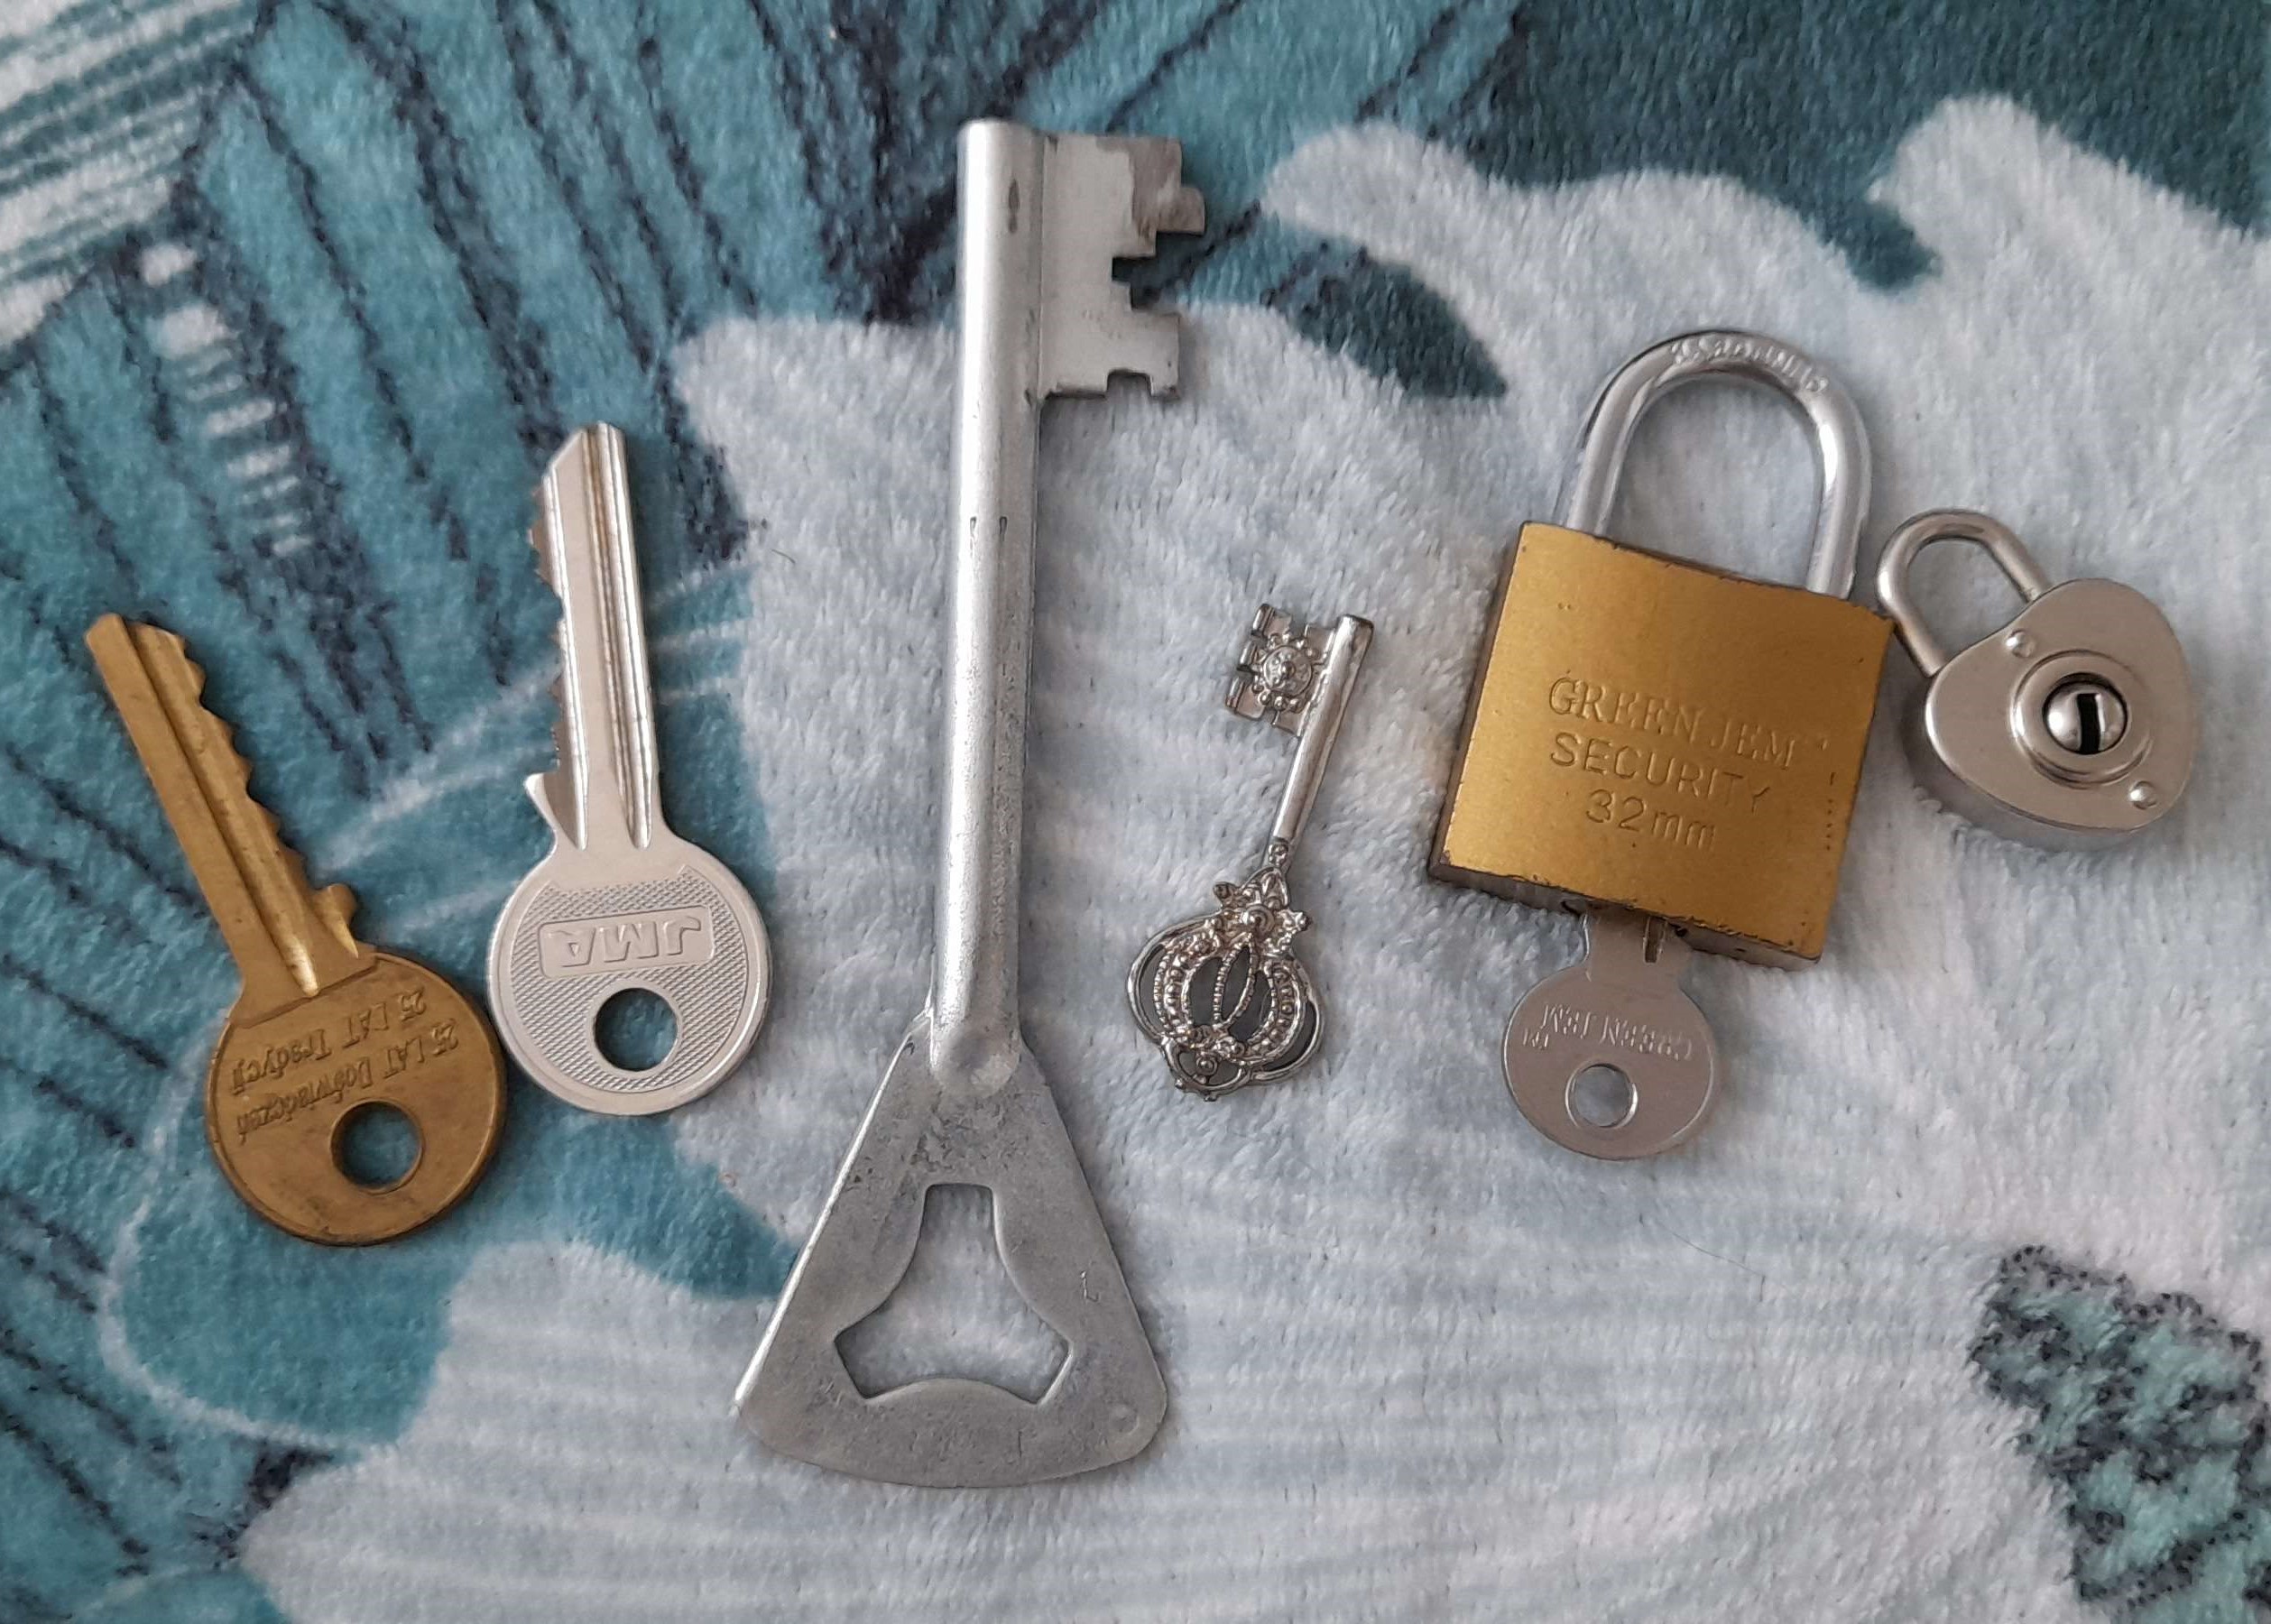 an image of four keys and two padlocks. all the keys are different sizes and colours, same with the padlocks